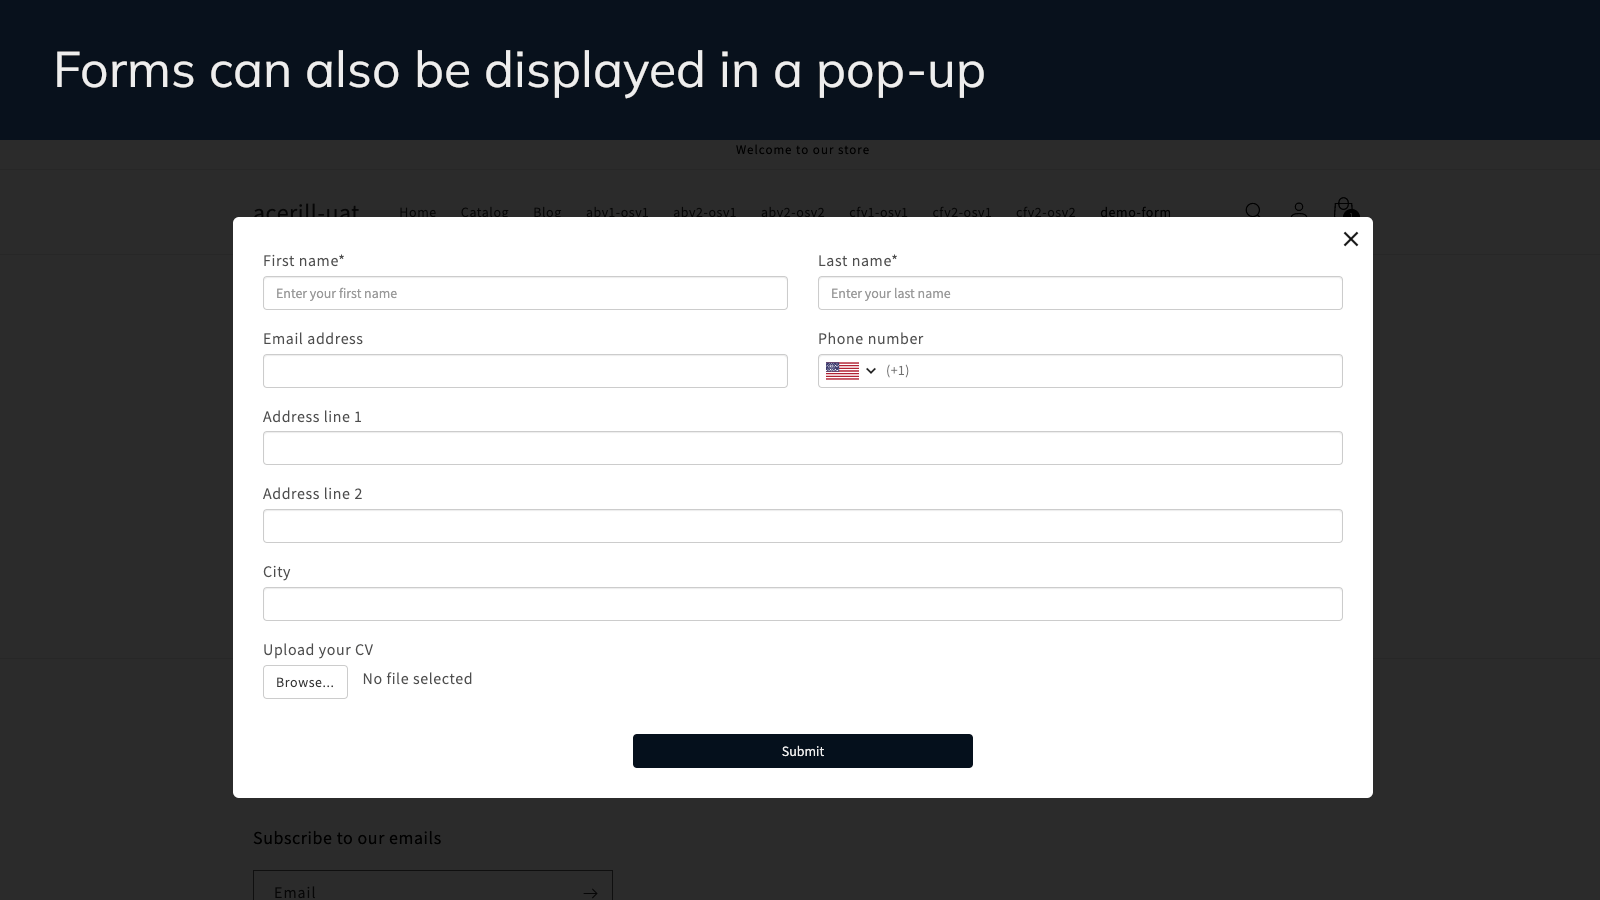 Forms can also be displayed in a pop-up